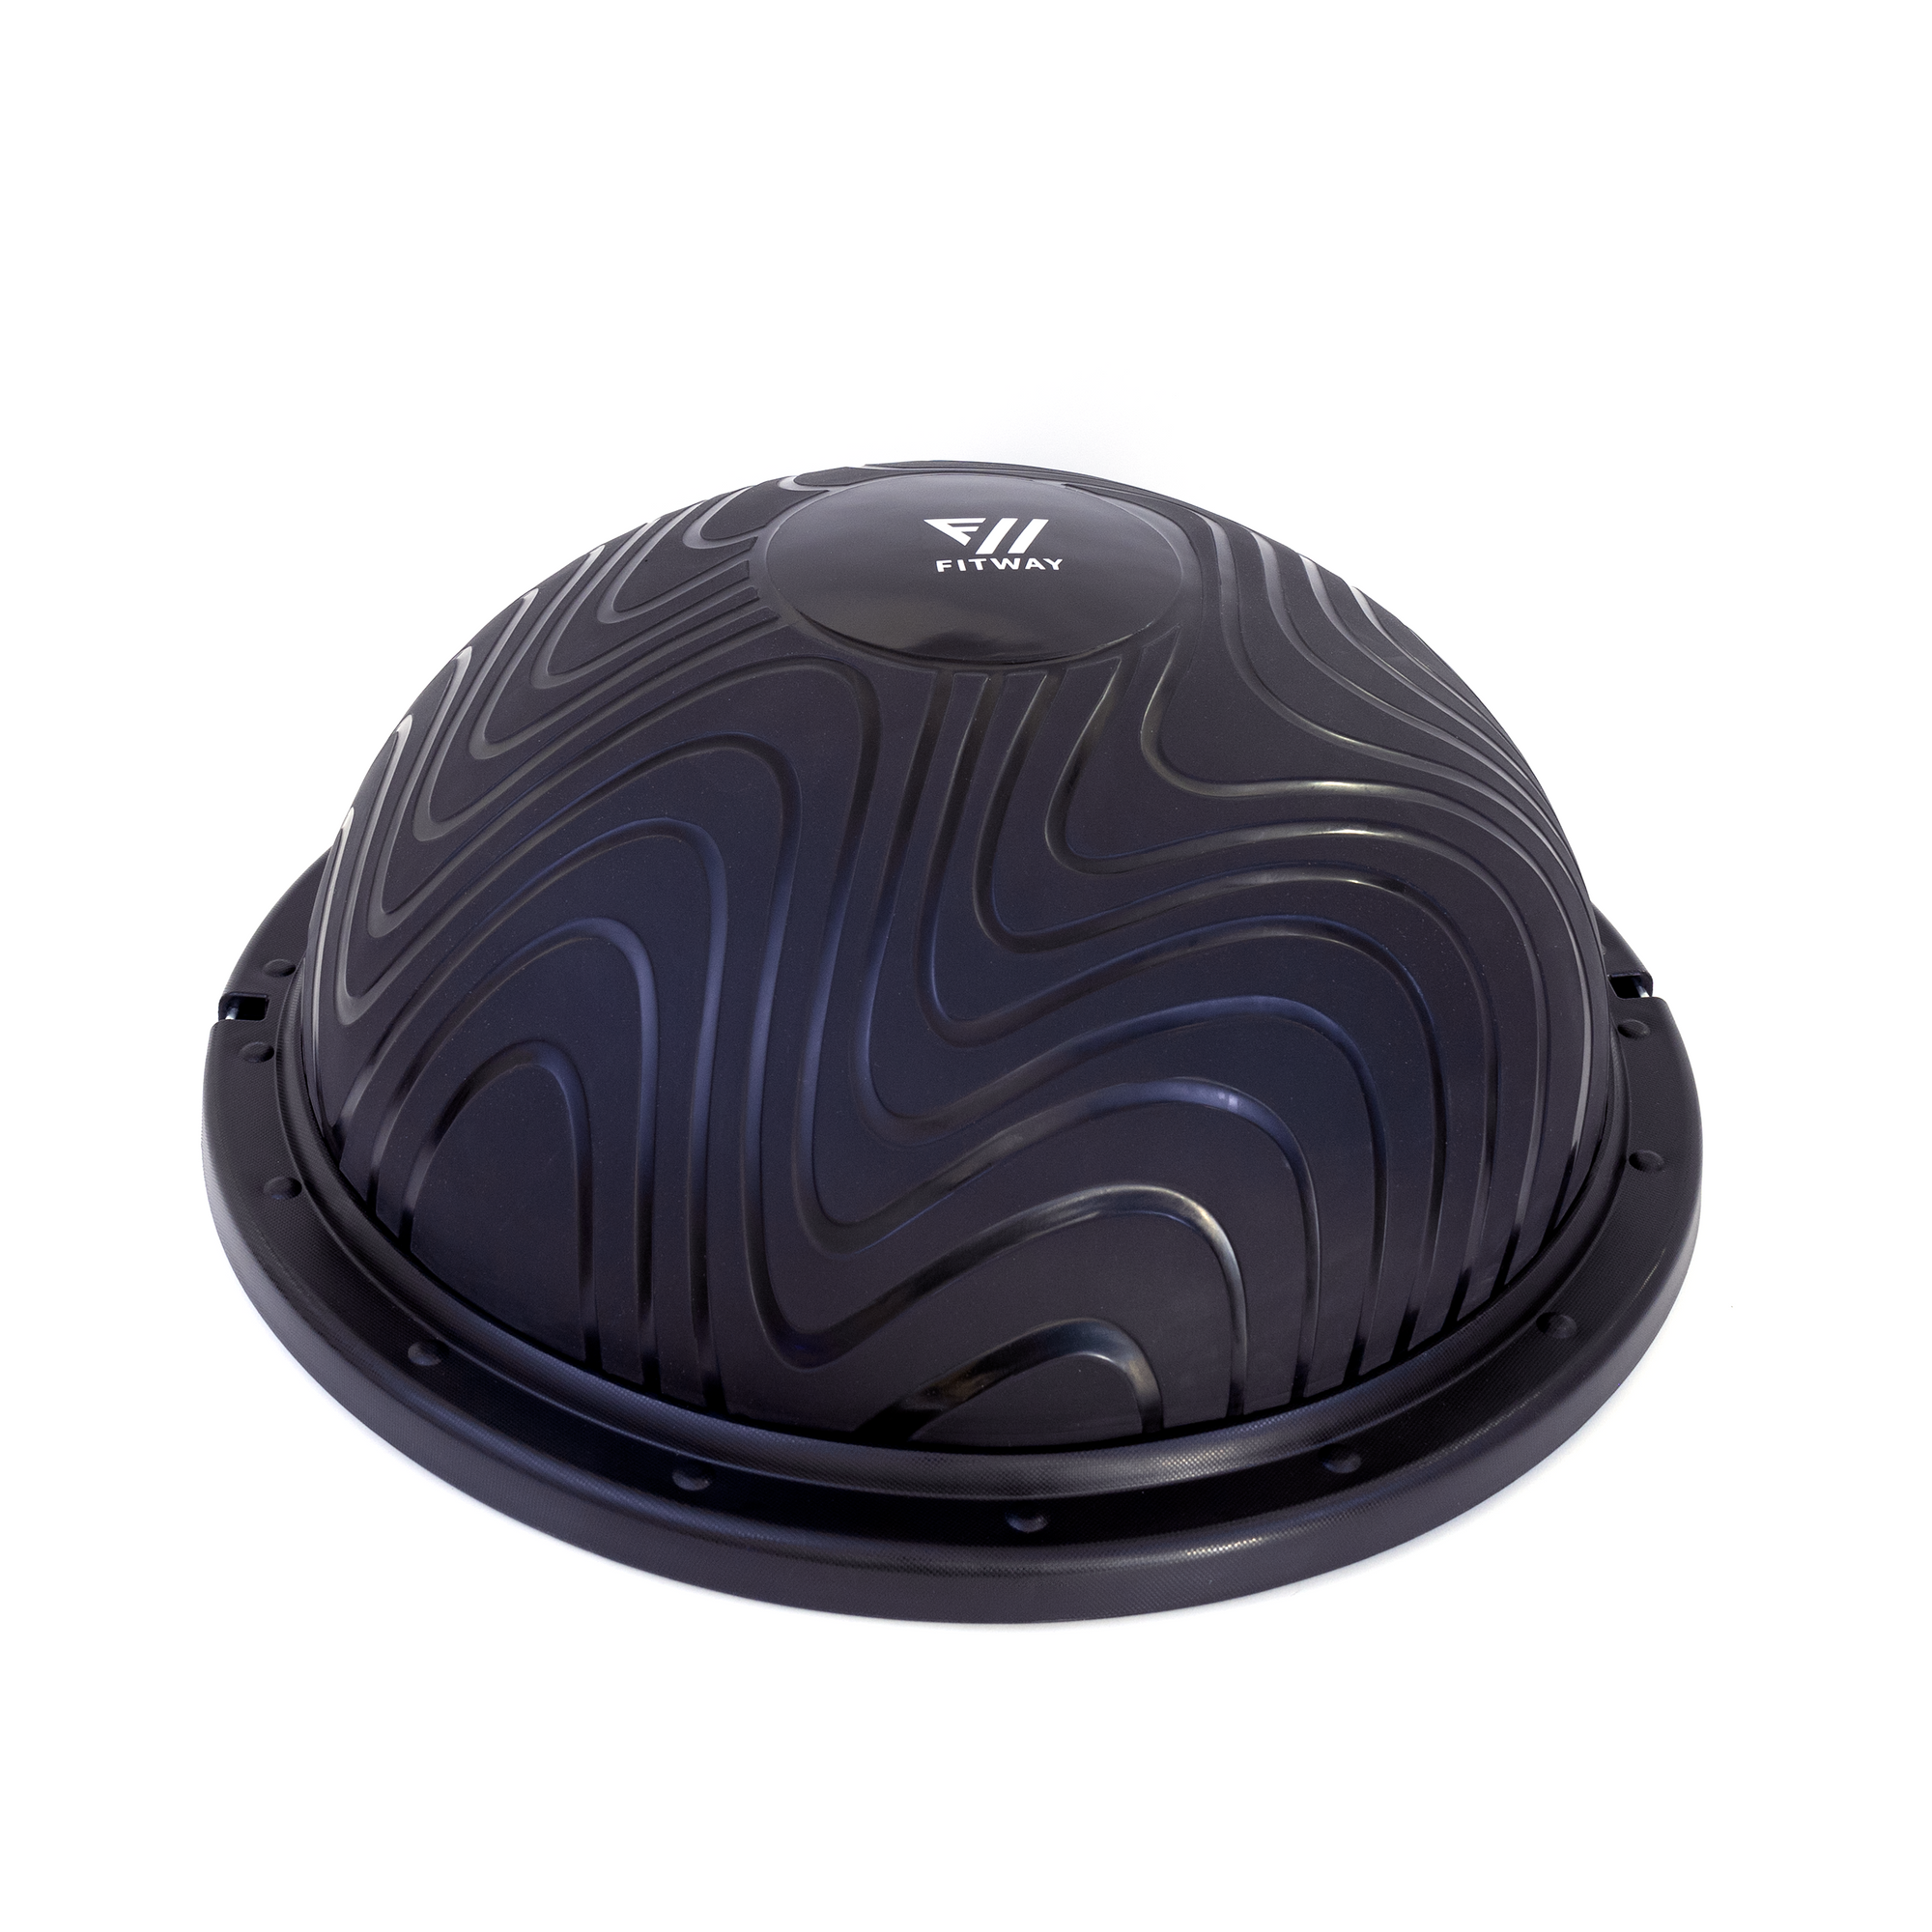 FitWay Equip. Dome Balance Ball 